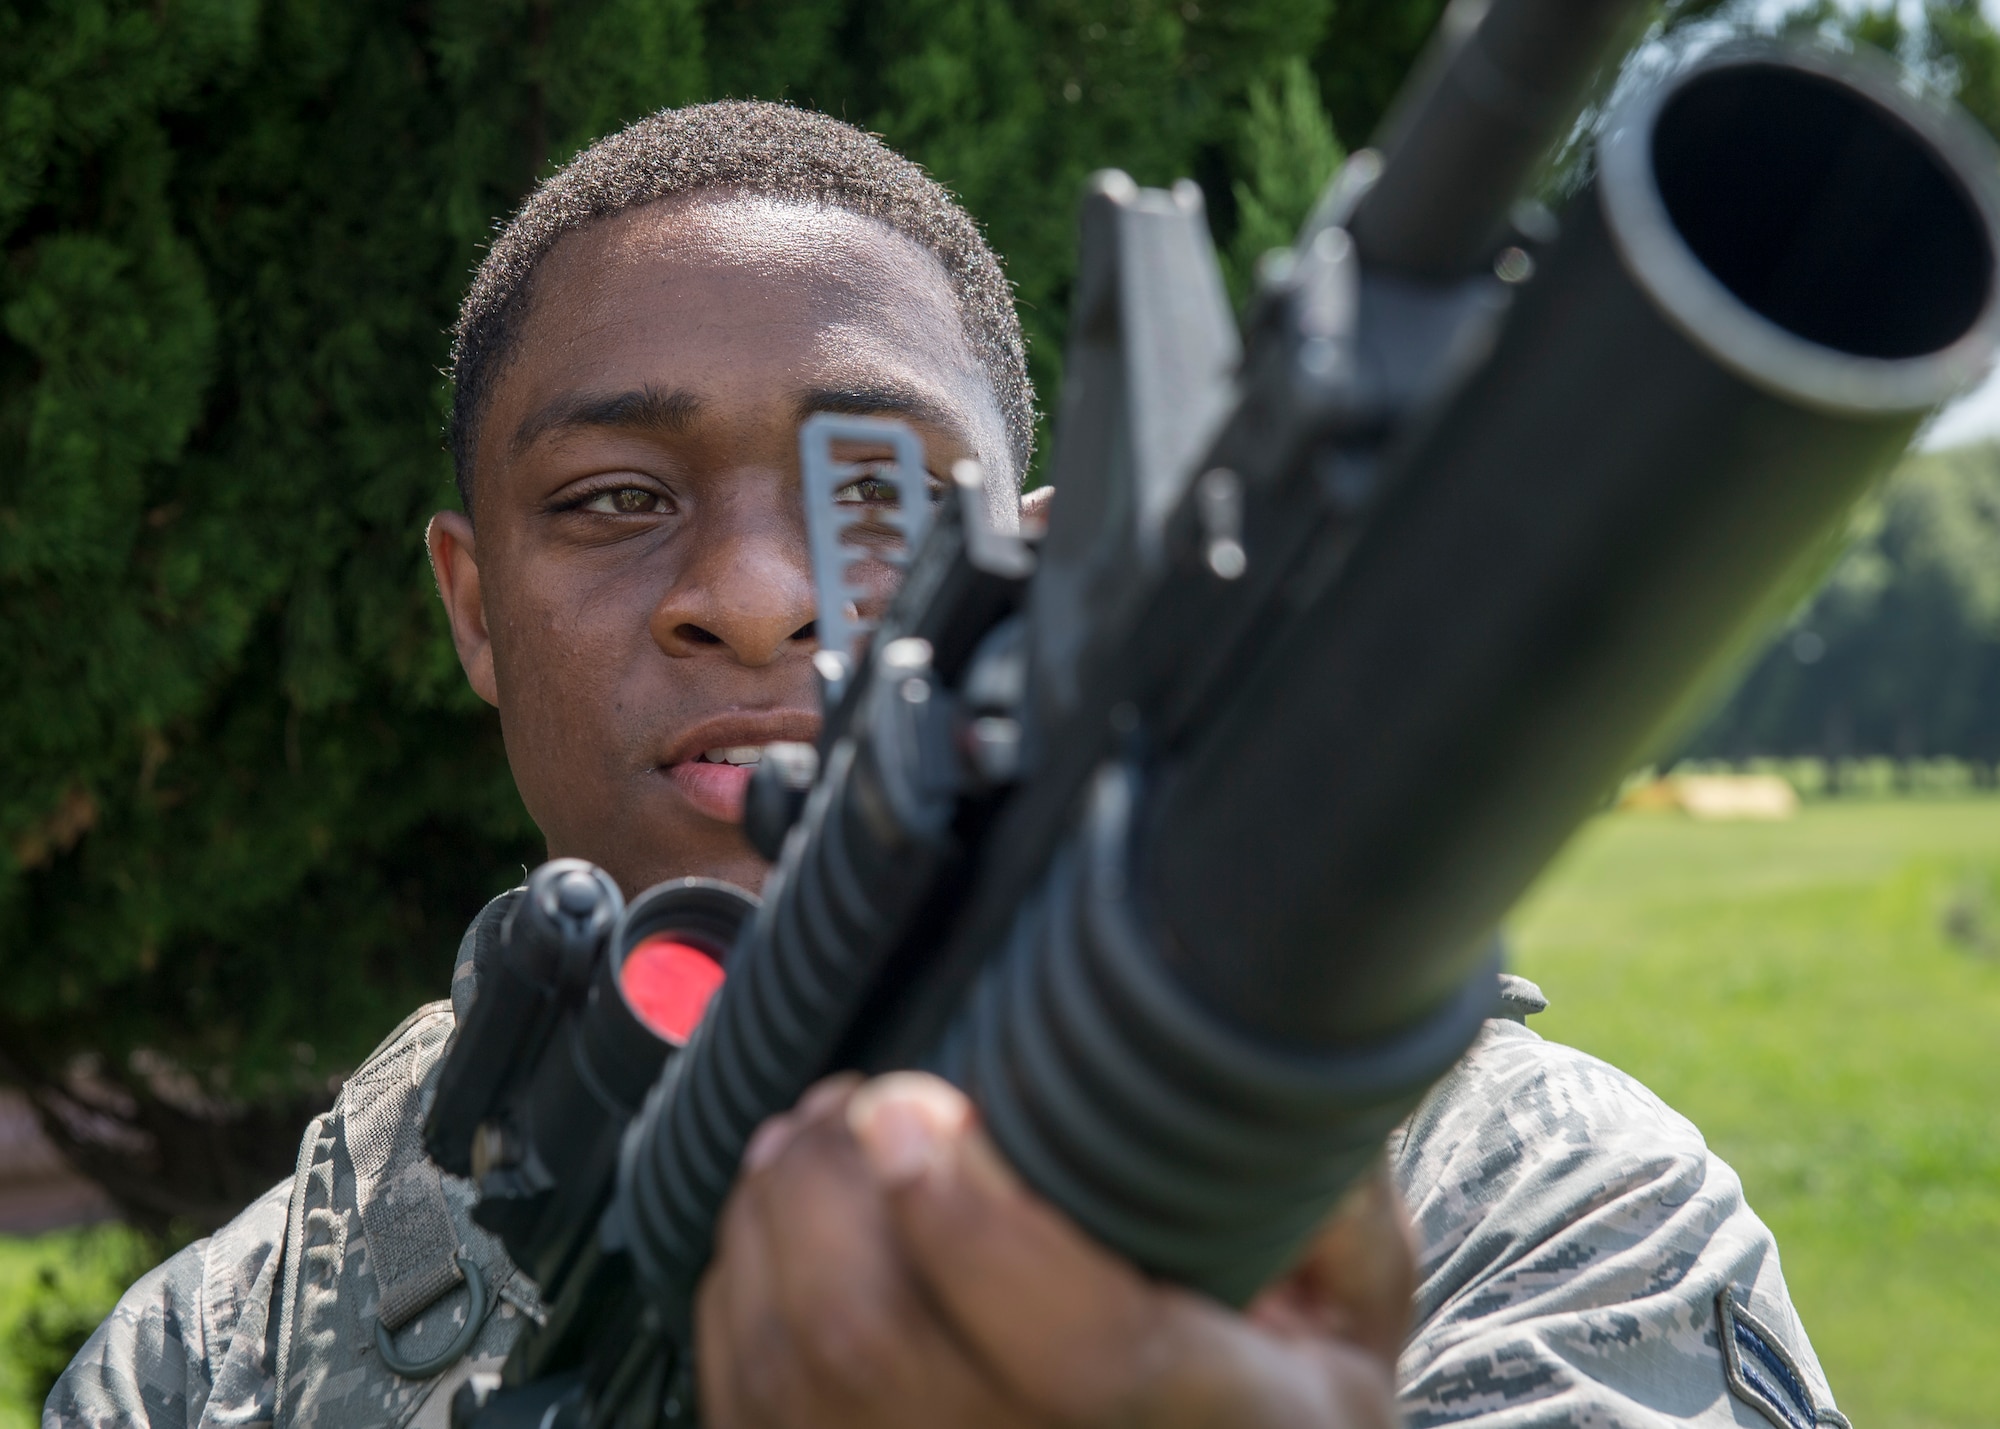 374th SFS hosts Weapons Handling Skills and Tactics Course